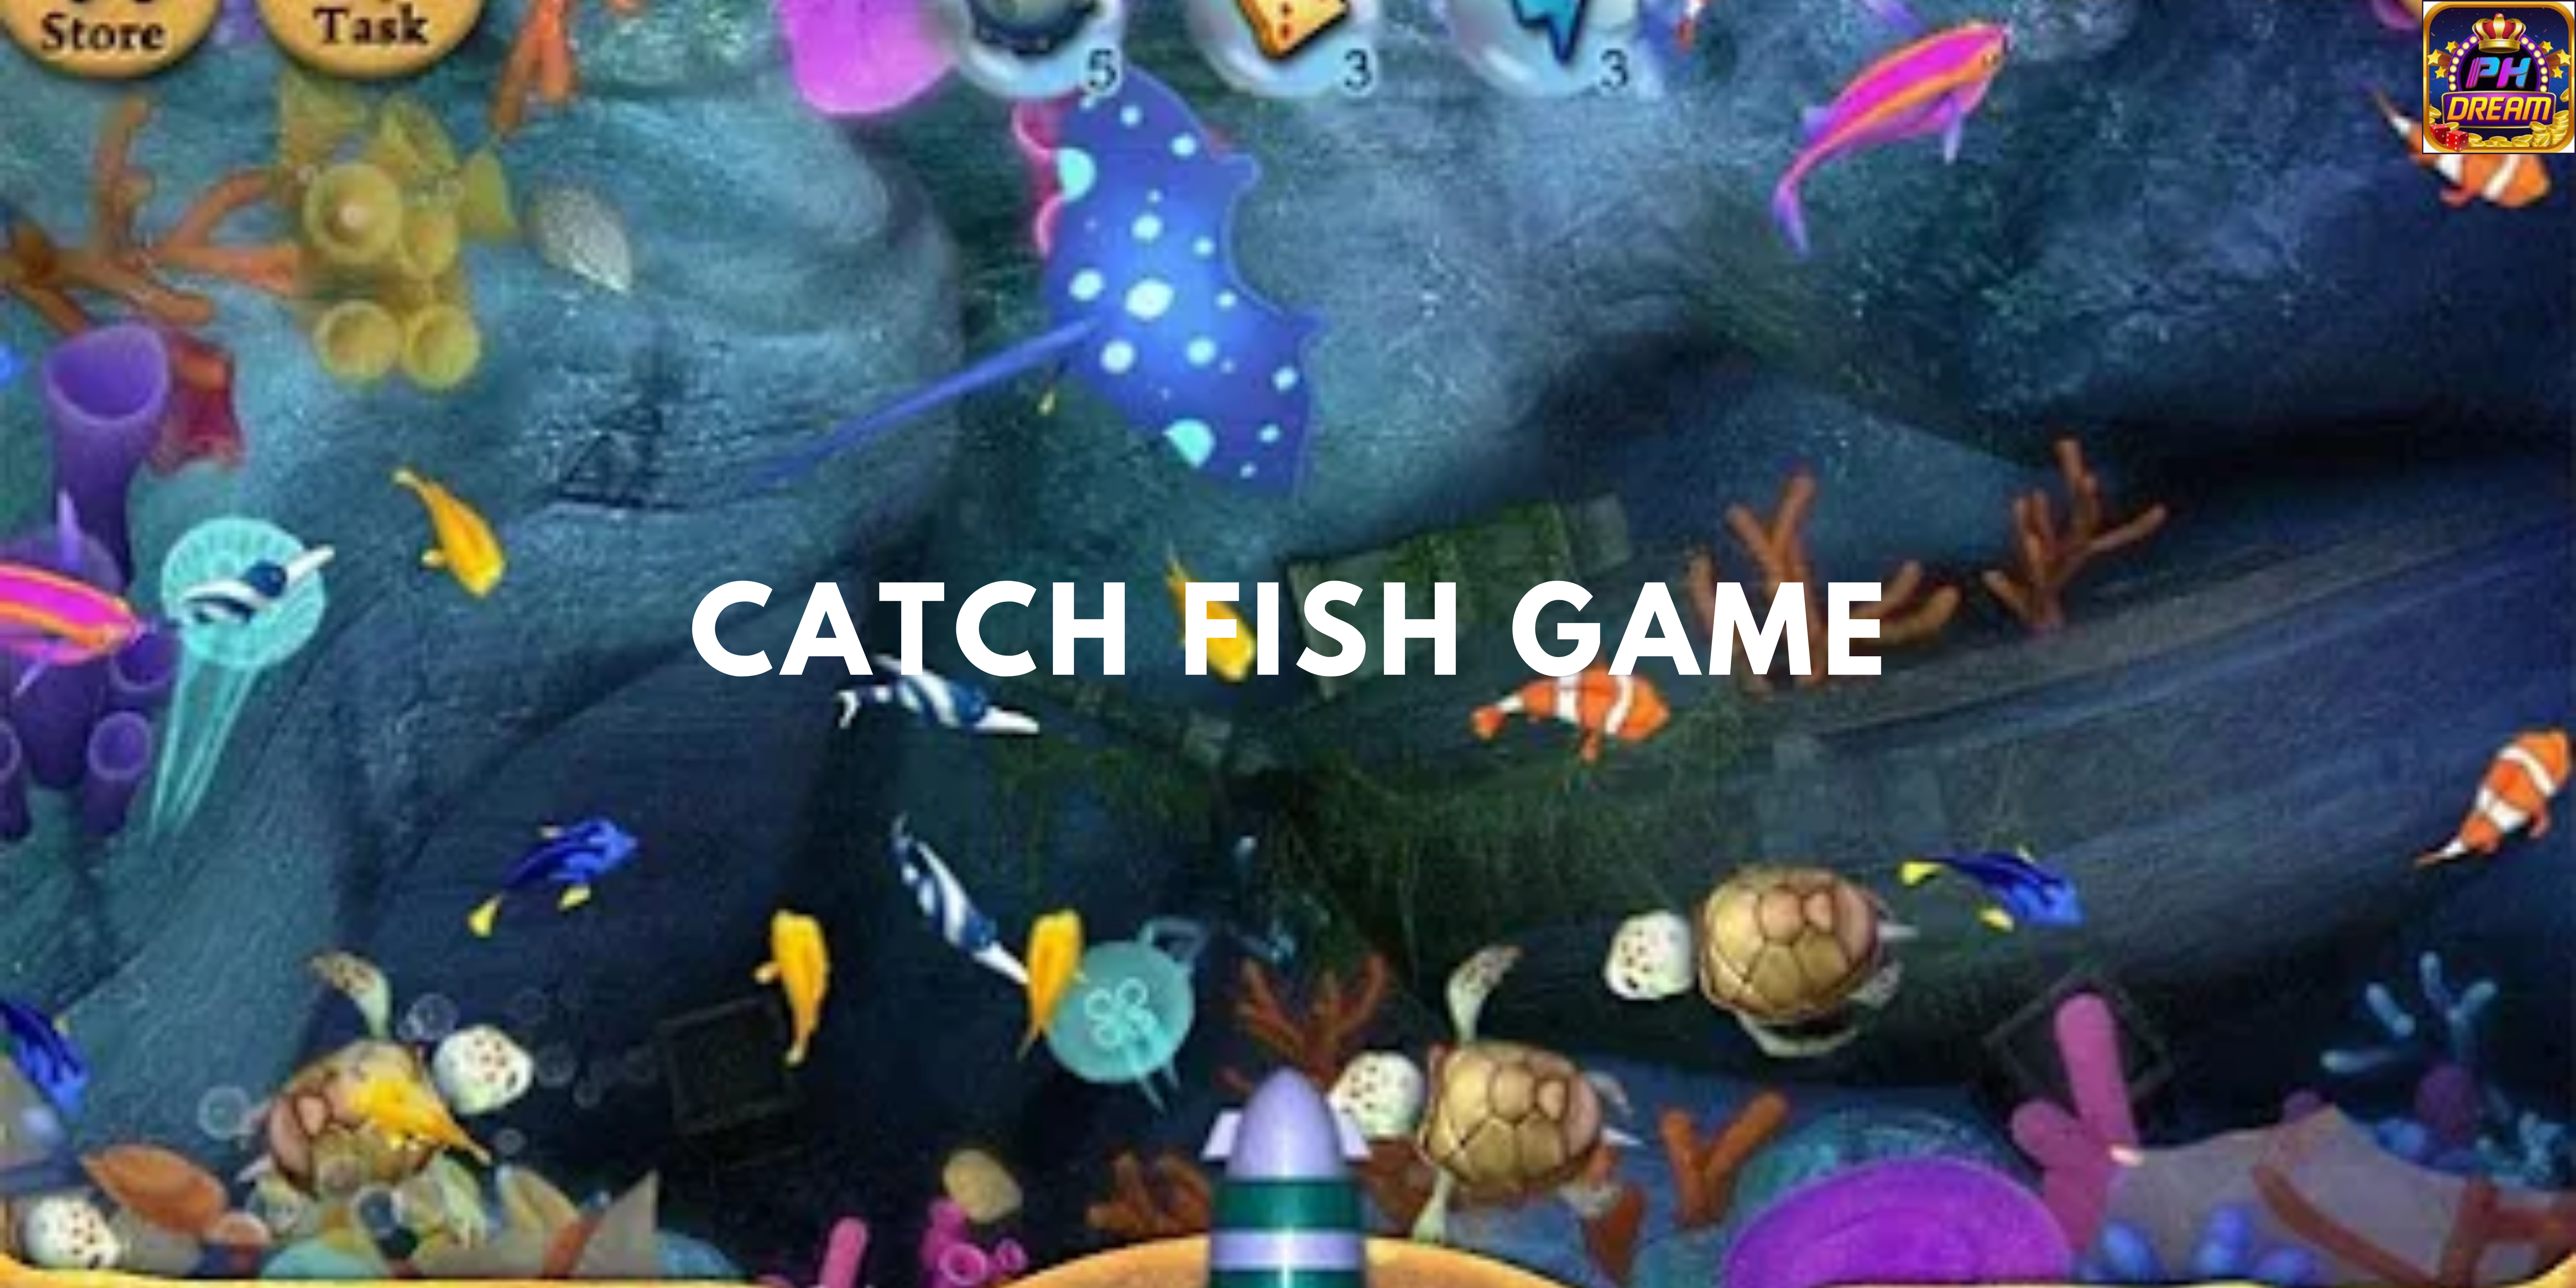 Catch Fish Game